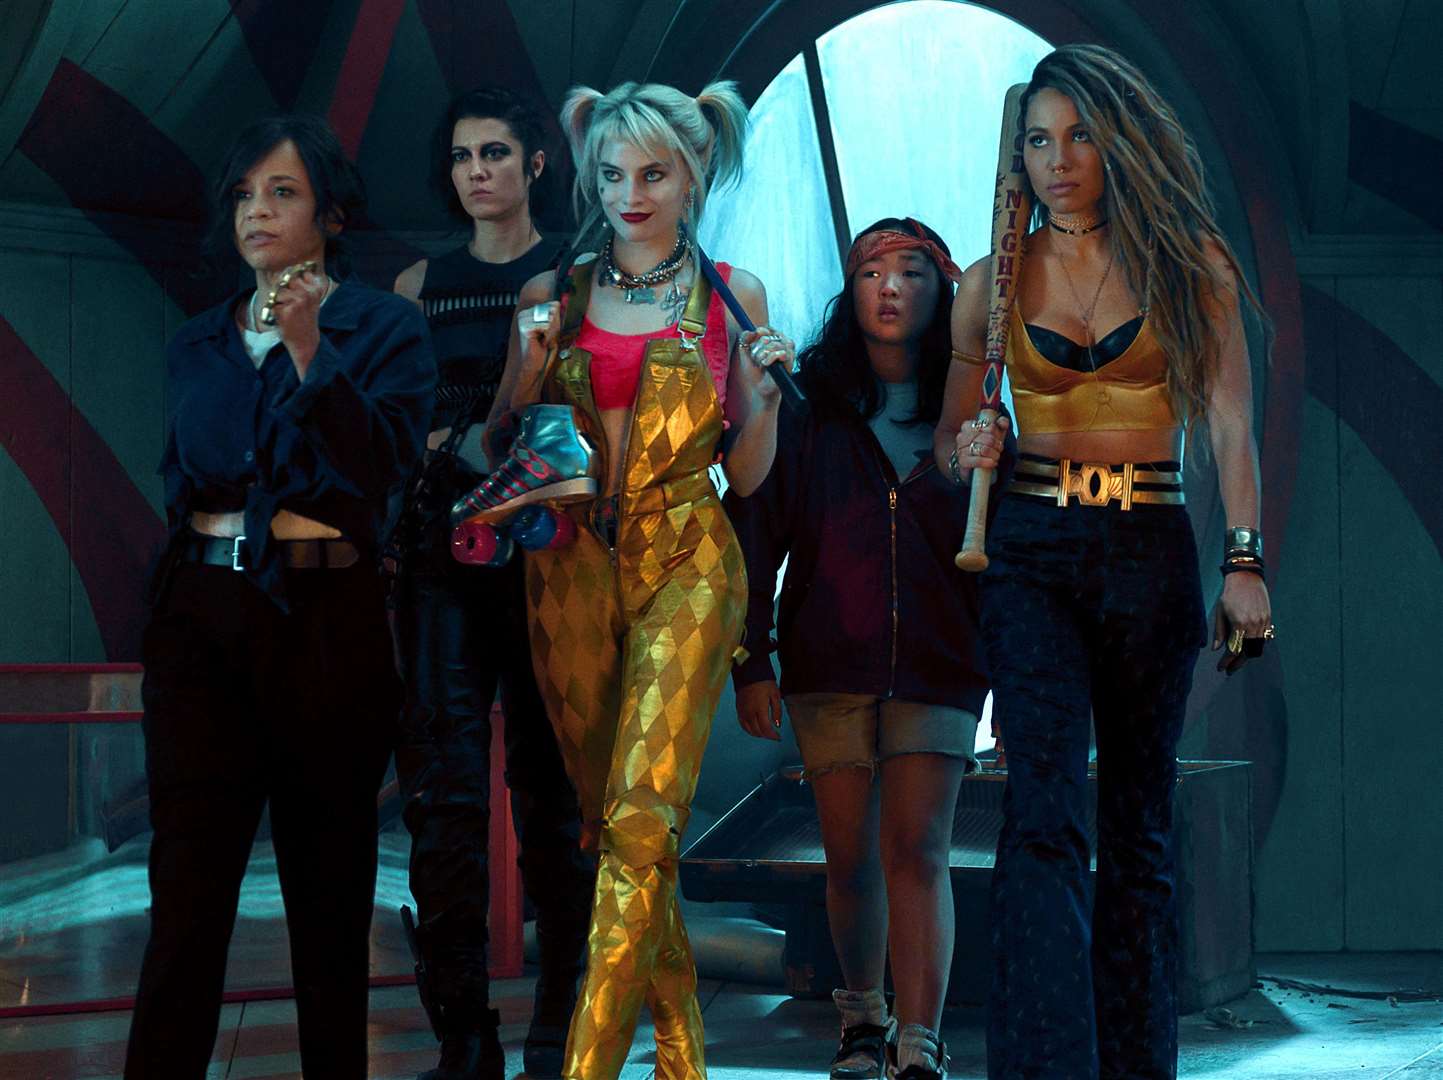 Birds Of Prey (And The Fantabulous Emancipation Of One Harley Quinn). Pictured: Rosie Perez as Renee Montoya, Mary Elizabeth Winstead as Helena Bertinelli, Margot Robbie as Harley Quinn, Ella Jay Basco as Cassandra Cain and Jurnee Smollett-Bell as Dinah Lance Picture: PA Photo/Warner Bros. Entertainment Inc./Claudette Barius